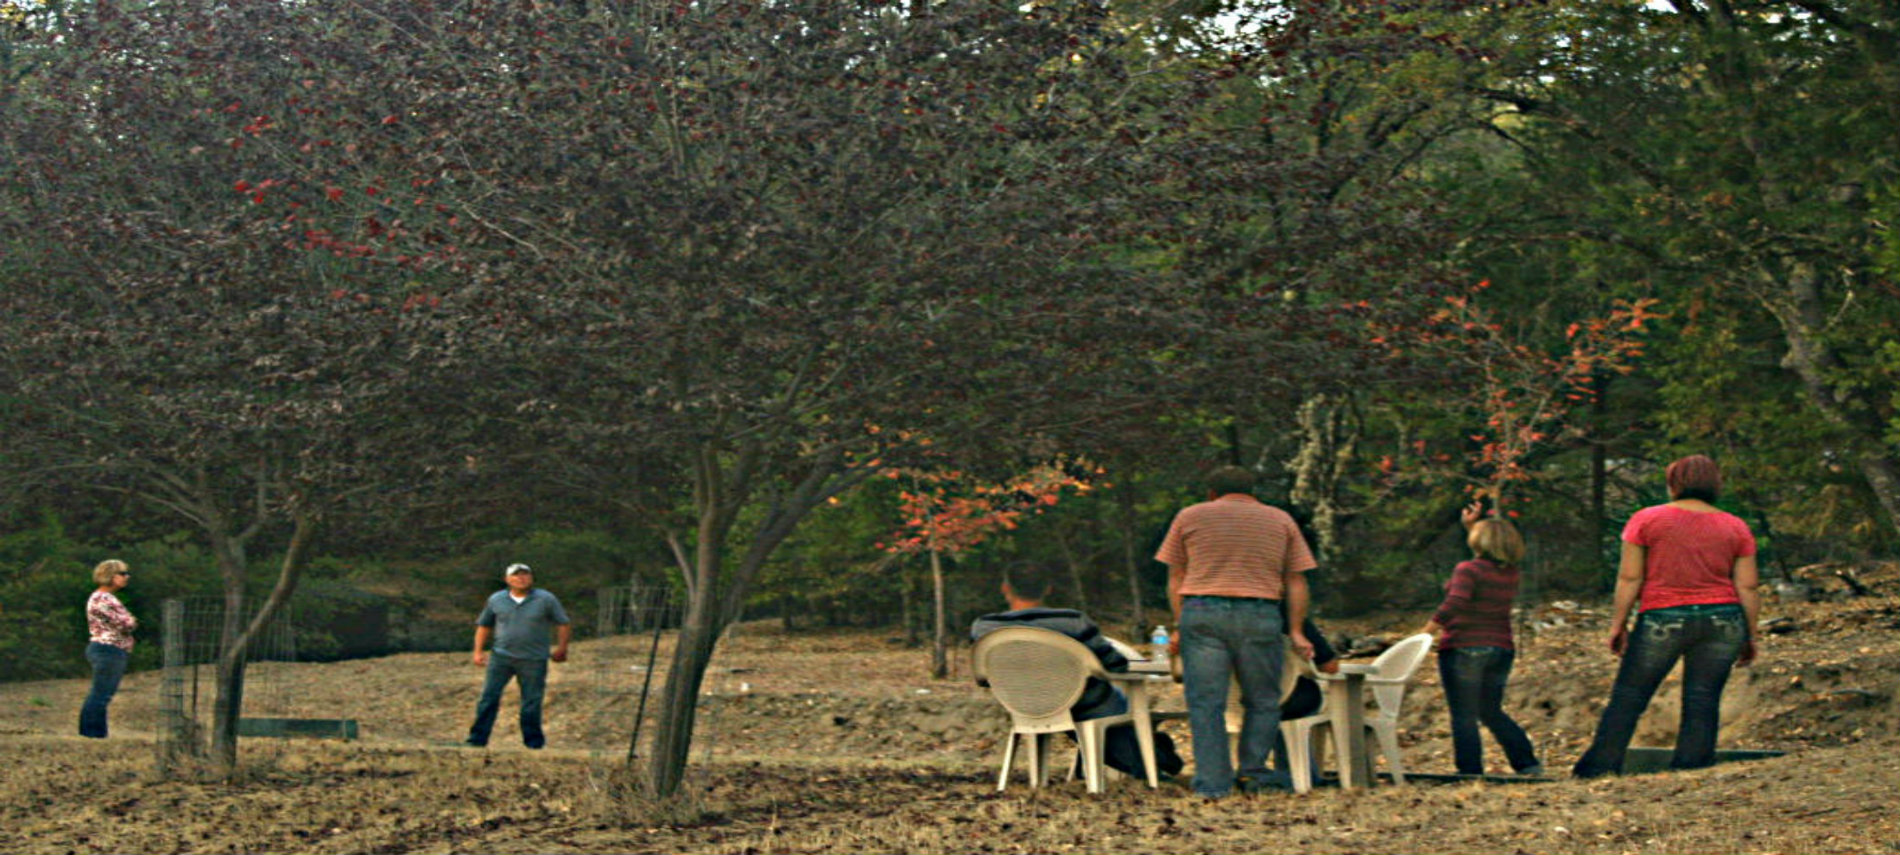 A group of people in an orchard, some sitting at a white table and chairs.